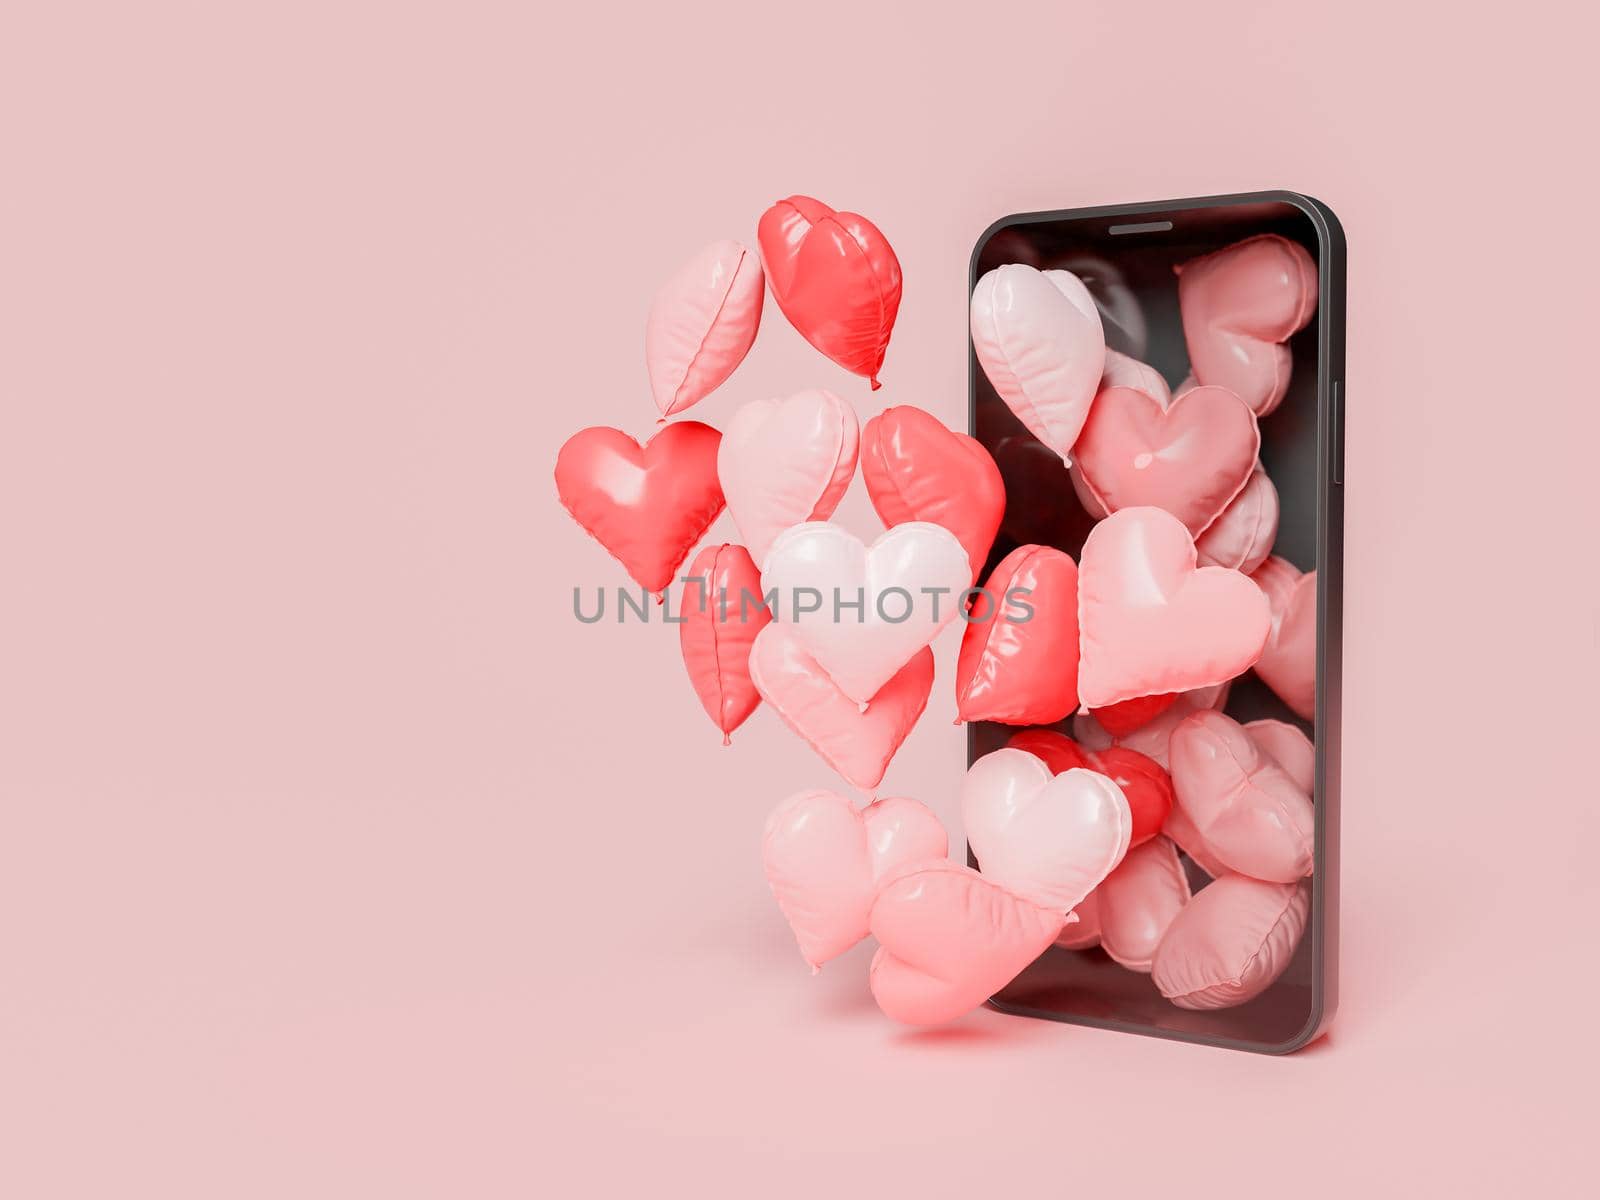 mobile phone with many heart balloons coming out of the screen by asolano